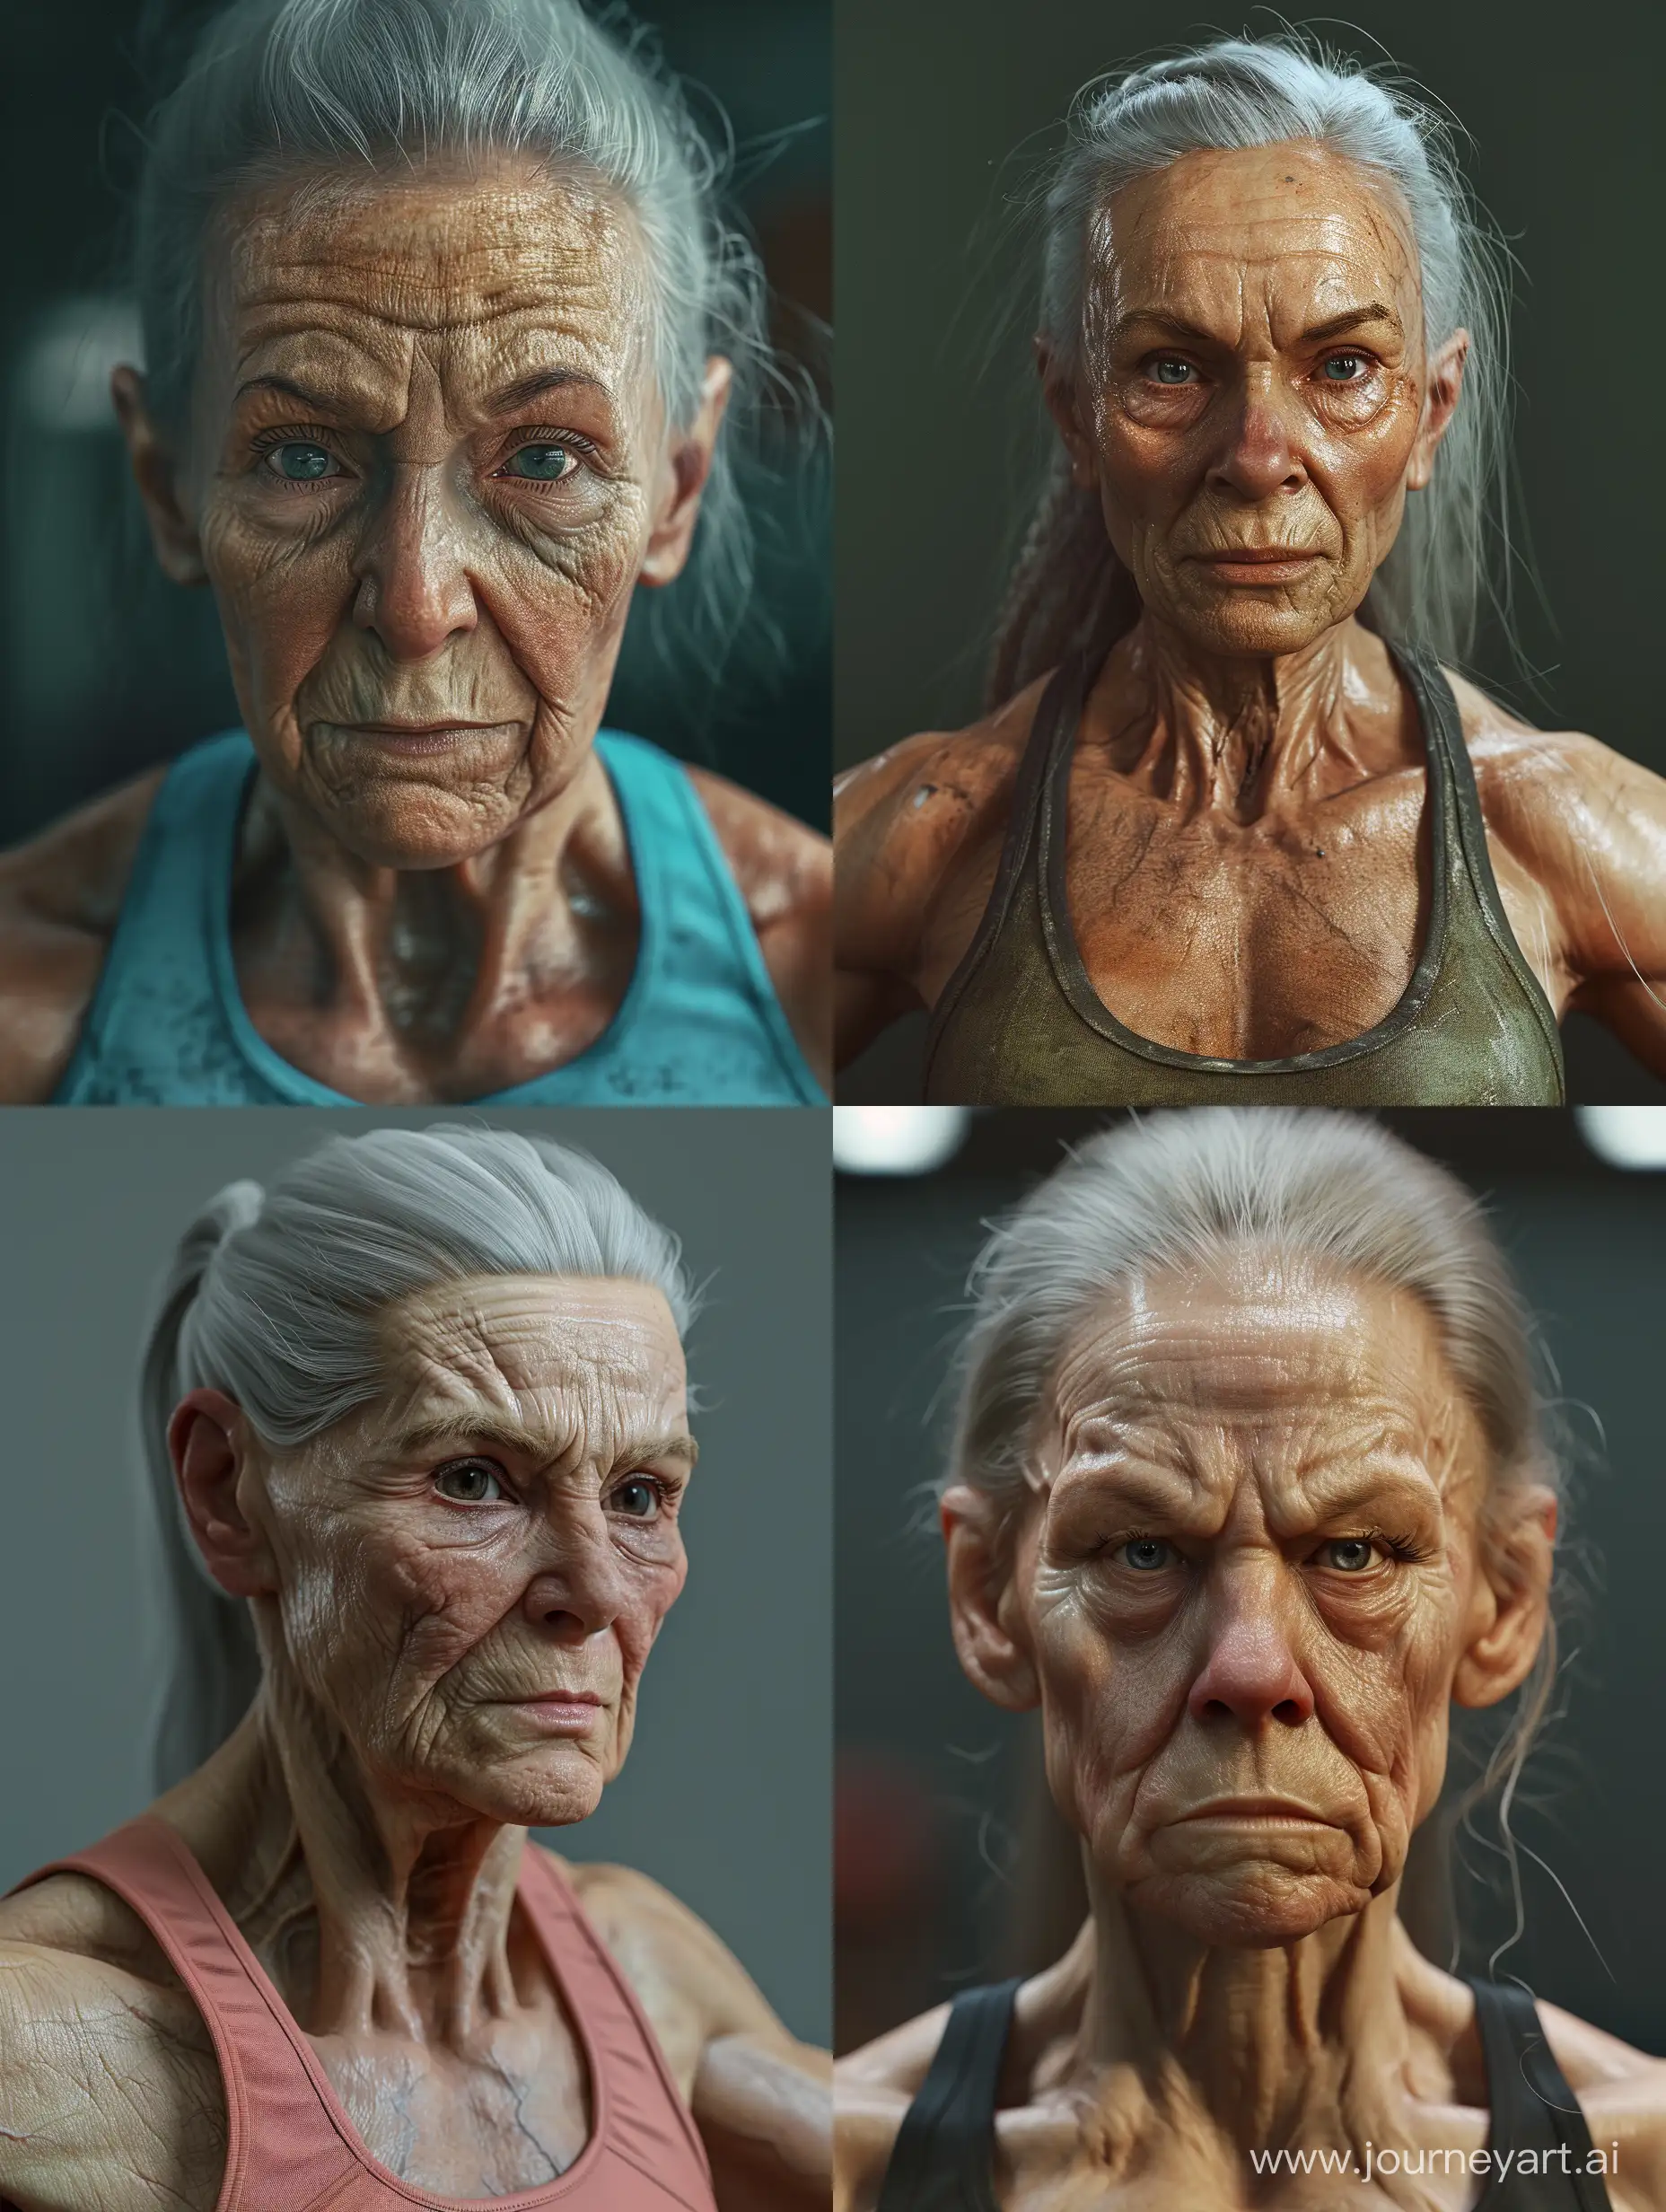 HyperRealistic-Portrait-Masterful-Exercise-Session-by-an-Old-Muscular-Woman